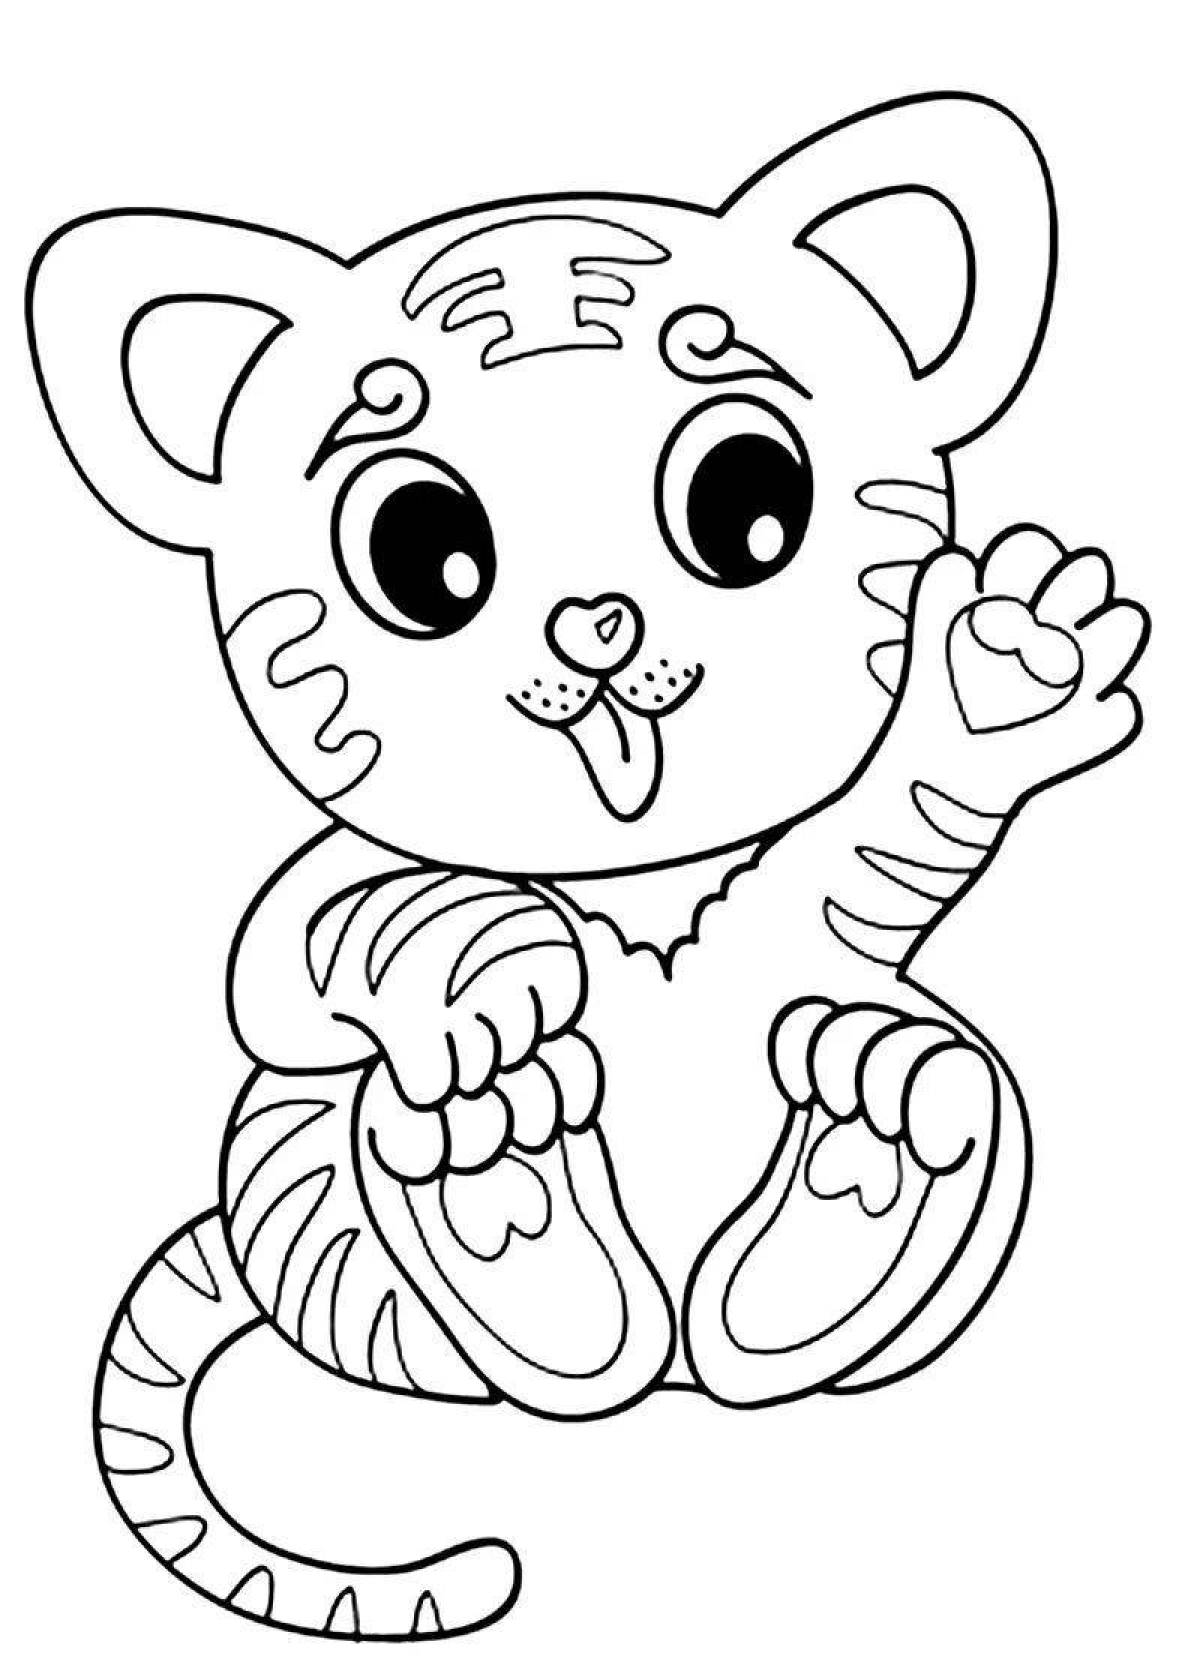 Adorable tiger coloring for girls